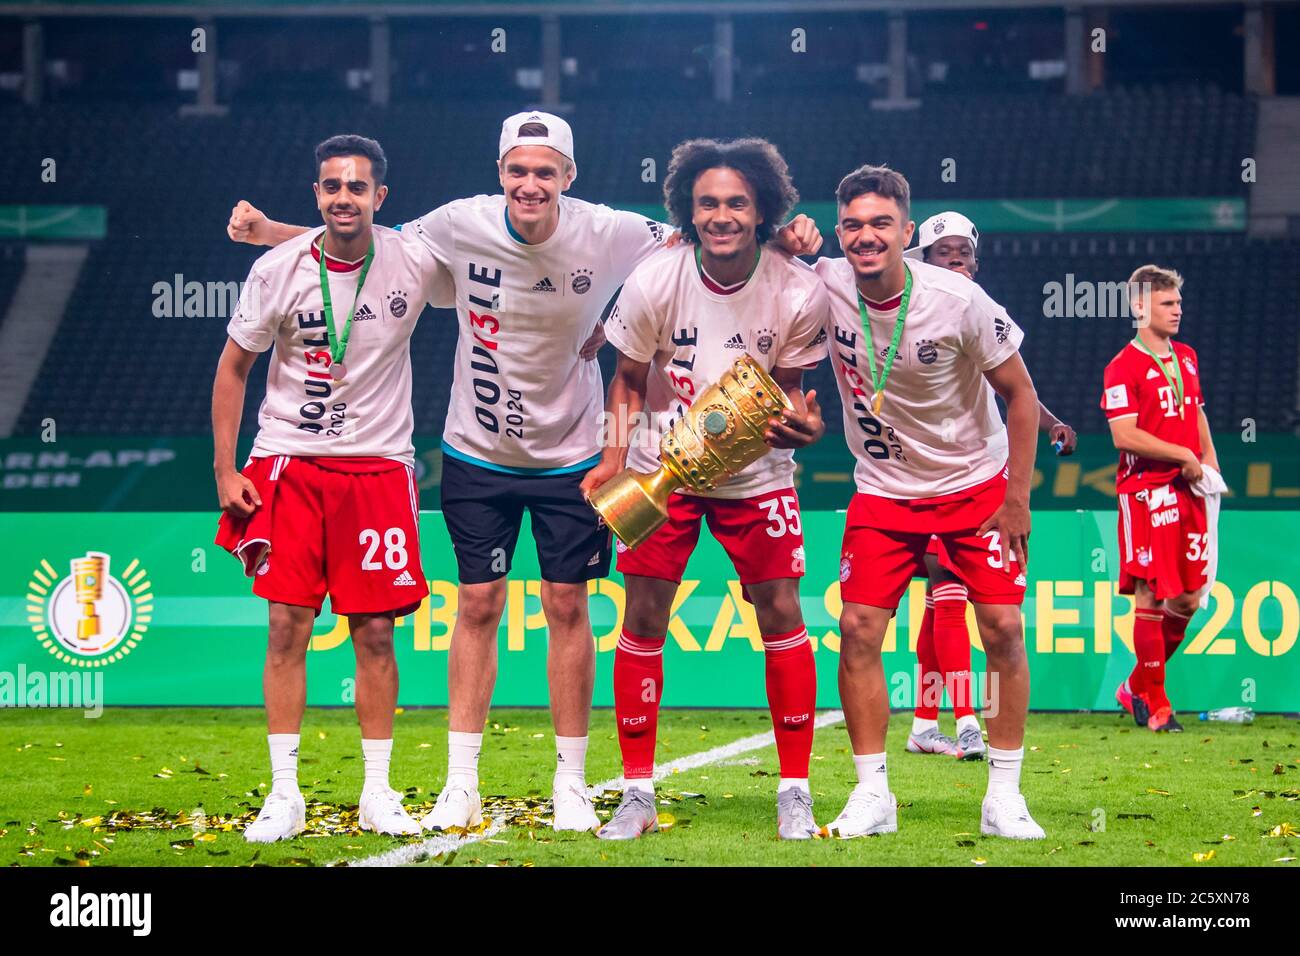 Berlin, Germany, 4 th July 2020,  Oliver BATISTA MEIER, FCB 34 fChristian FRÜCHTL, FCB 36 35 Sarpreet SINGH , FCB 28. with trophy at the DFB Pokal Final match  FC BAYERN MUENCHEN - BAYER 04 LEVERKUSEN 4-2  in season 2019/2020 , FCB Foto: © Peter Schatz / Alamy Live News / Kevin Voigt/Jan Huebner/Pool   - DFB REGULATIONS PROHIBIT ANY USE OF PHOTOGRAPHS as IMAGE SEQUENCES and/or QUASI-VIDEO -  National and international News-Agencies OUT Editorial Use ONLY Stock Photo